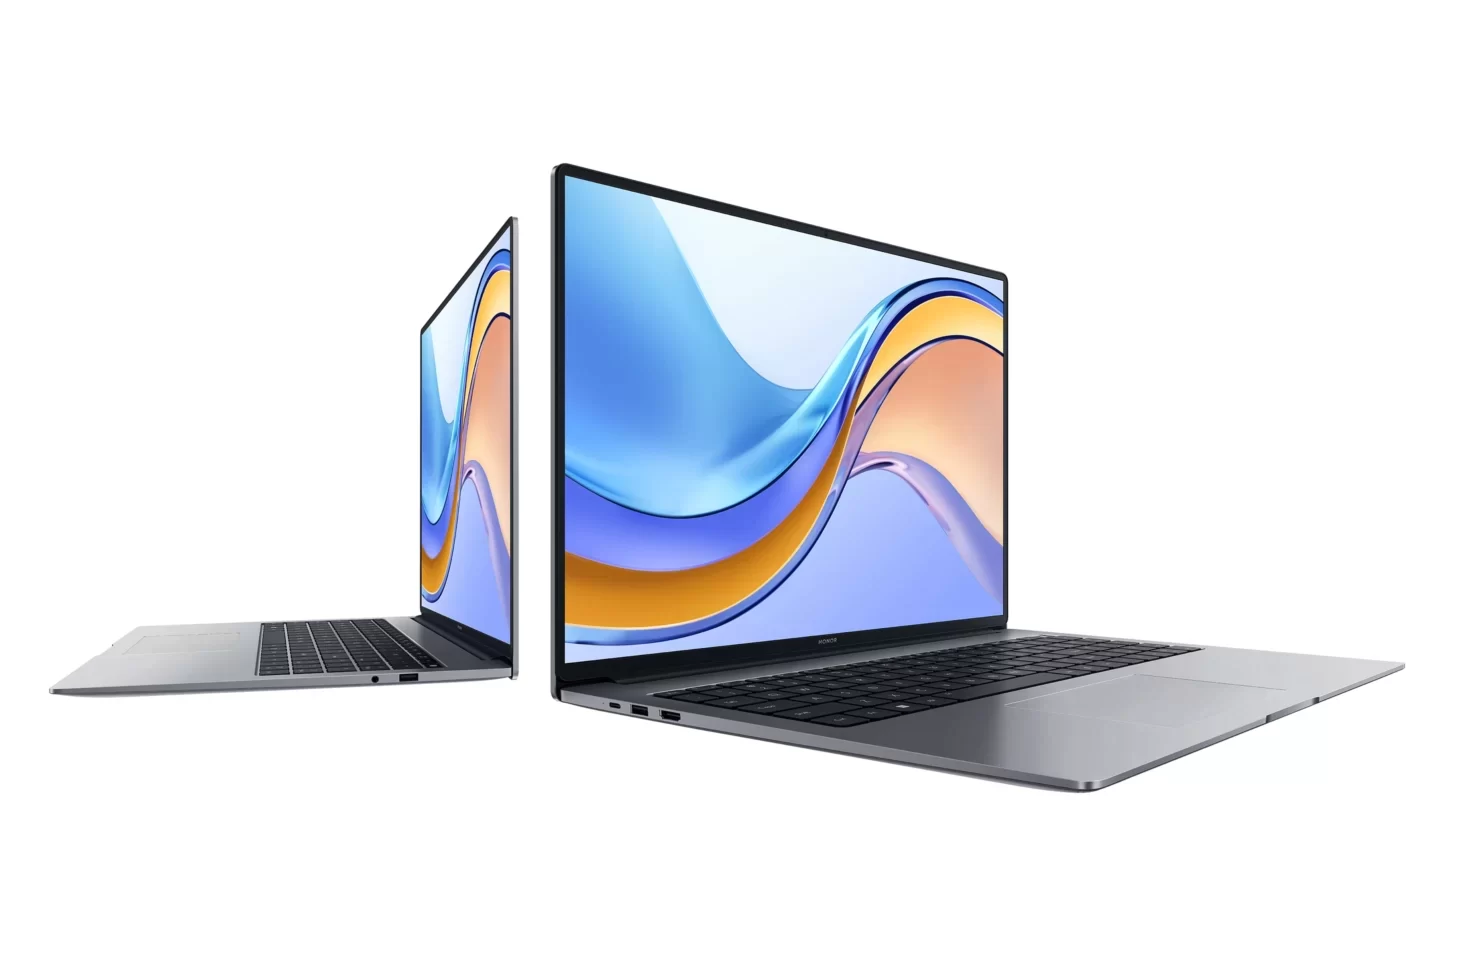 Introducing the Honor MagicBook X14 and X16 Laptops